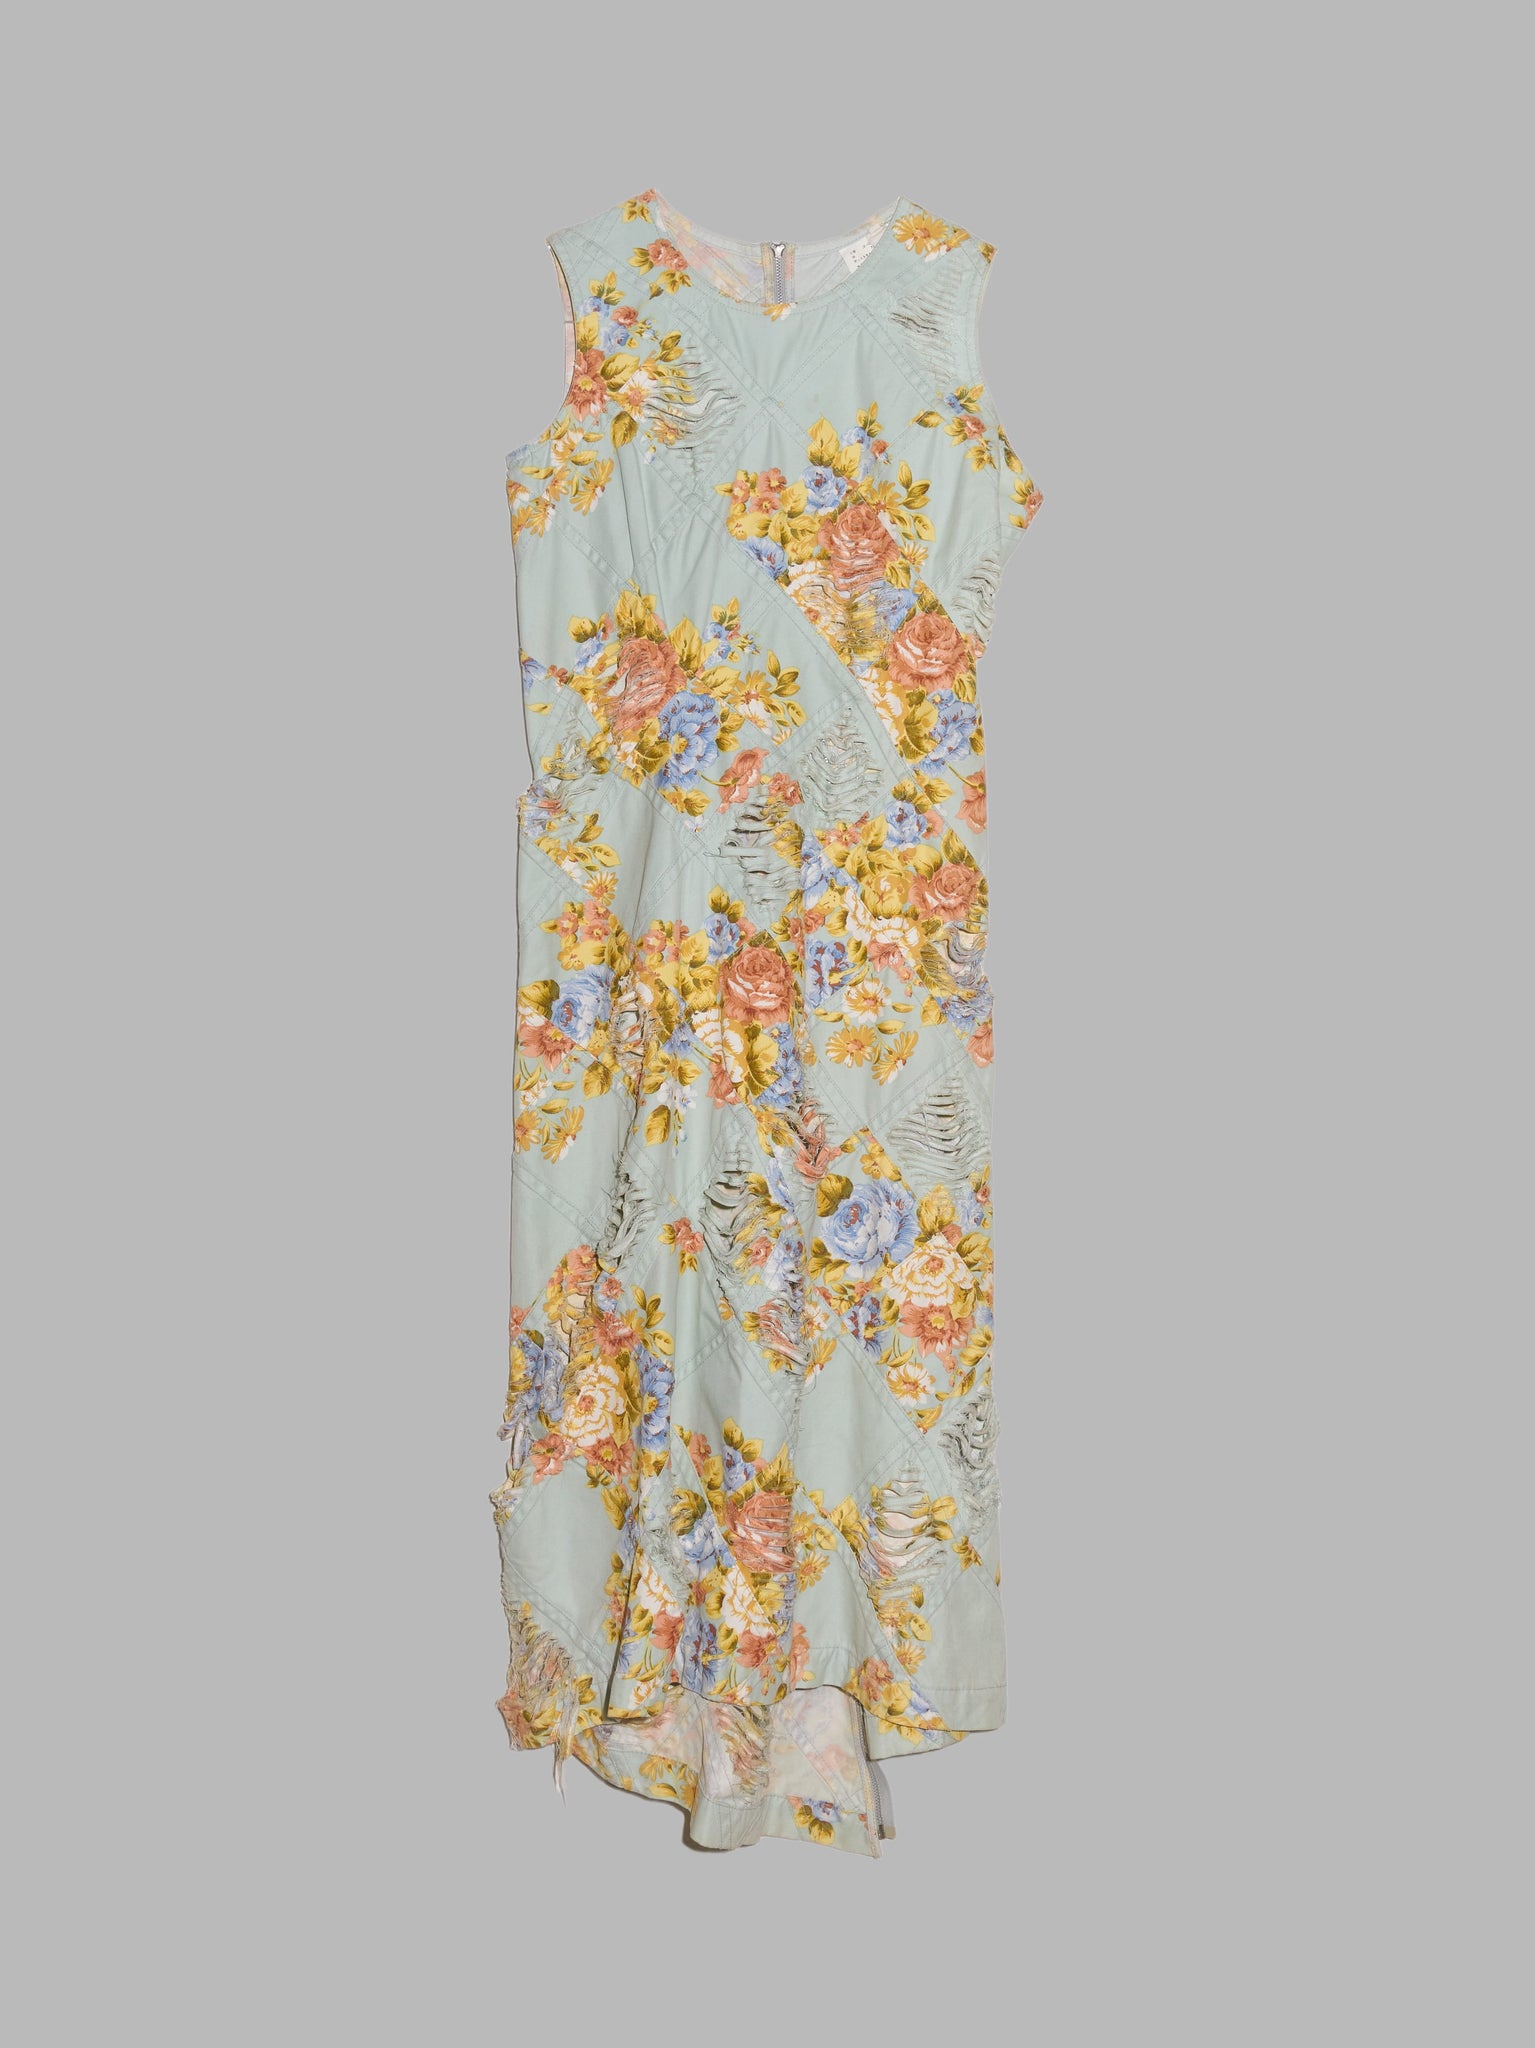 Junya Watanabe Comme des Garcons spring 2002 distressed floral sleeveless dress